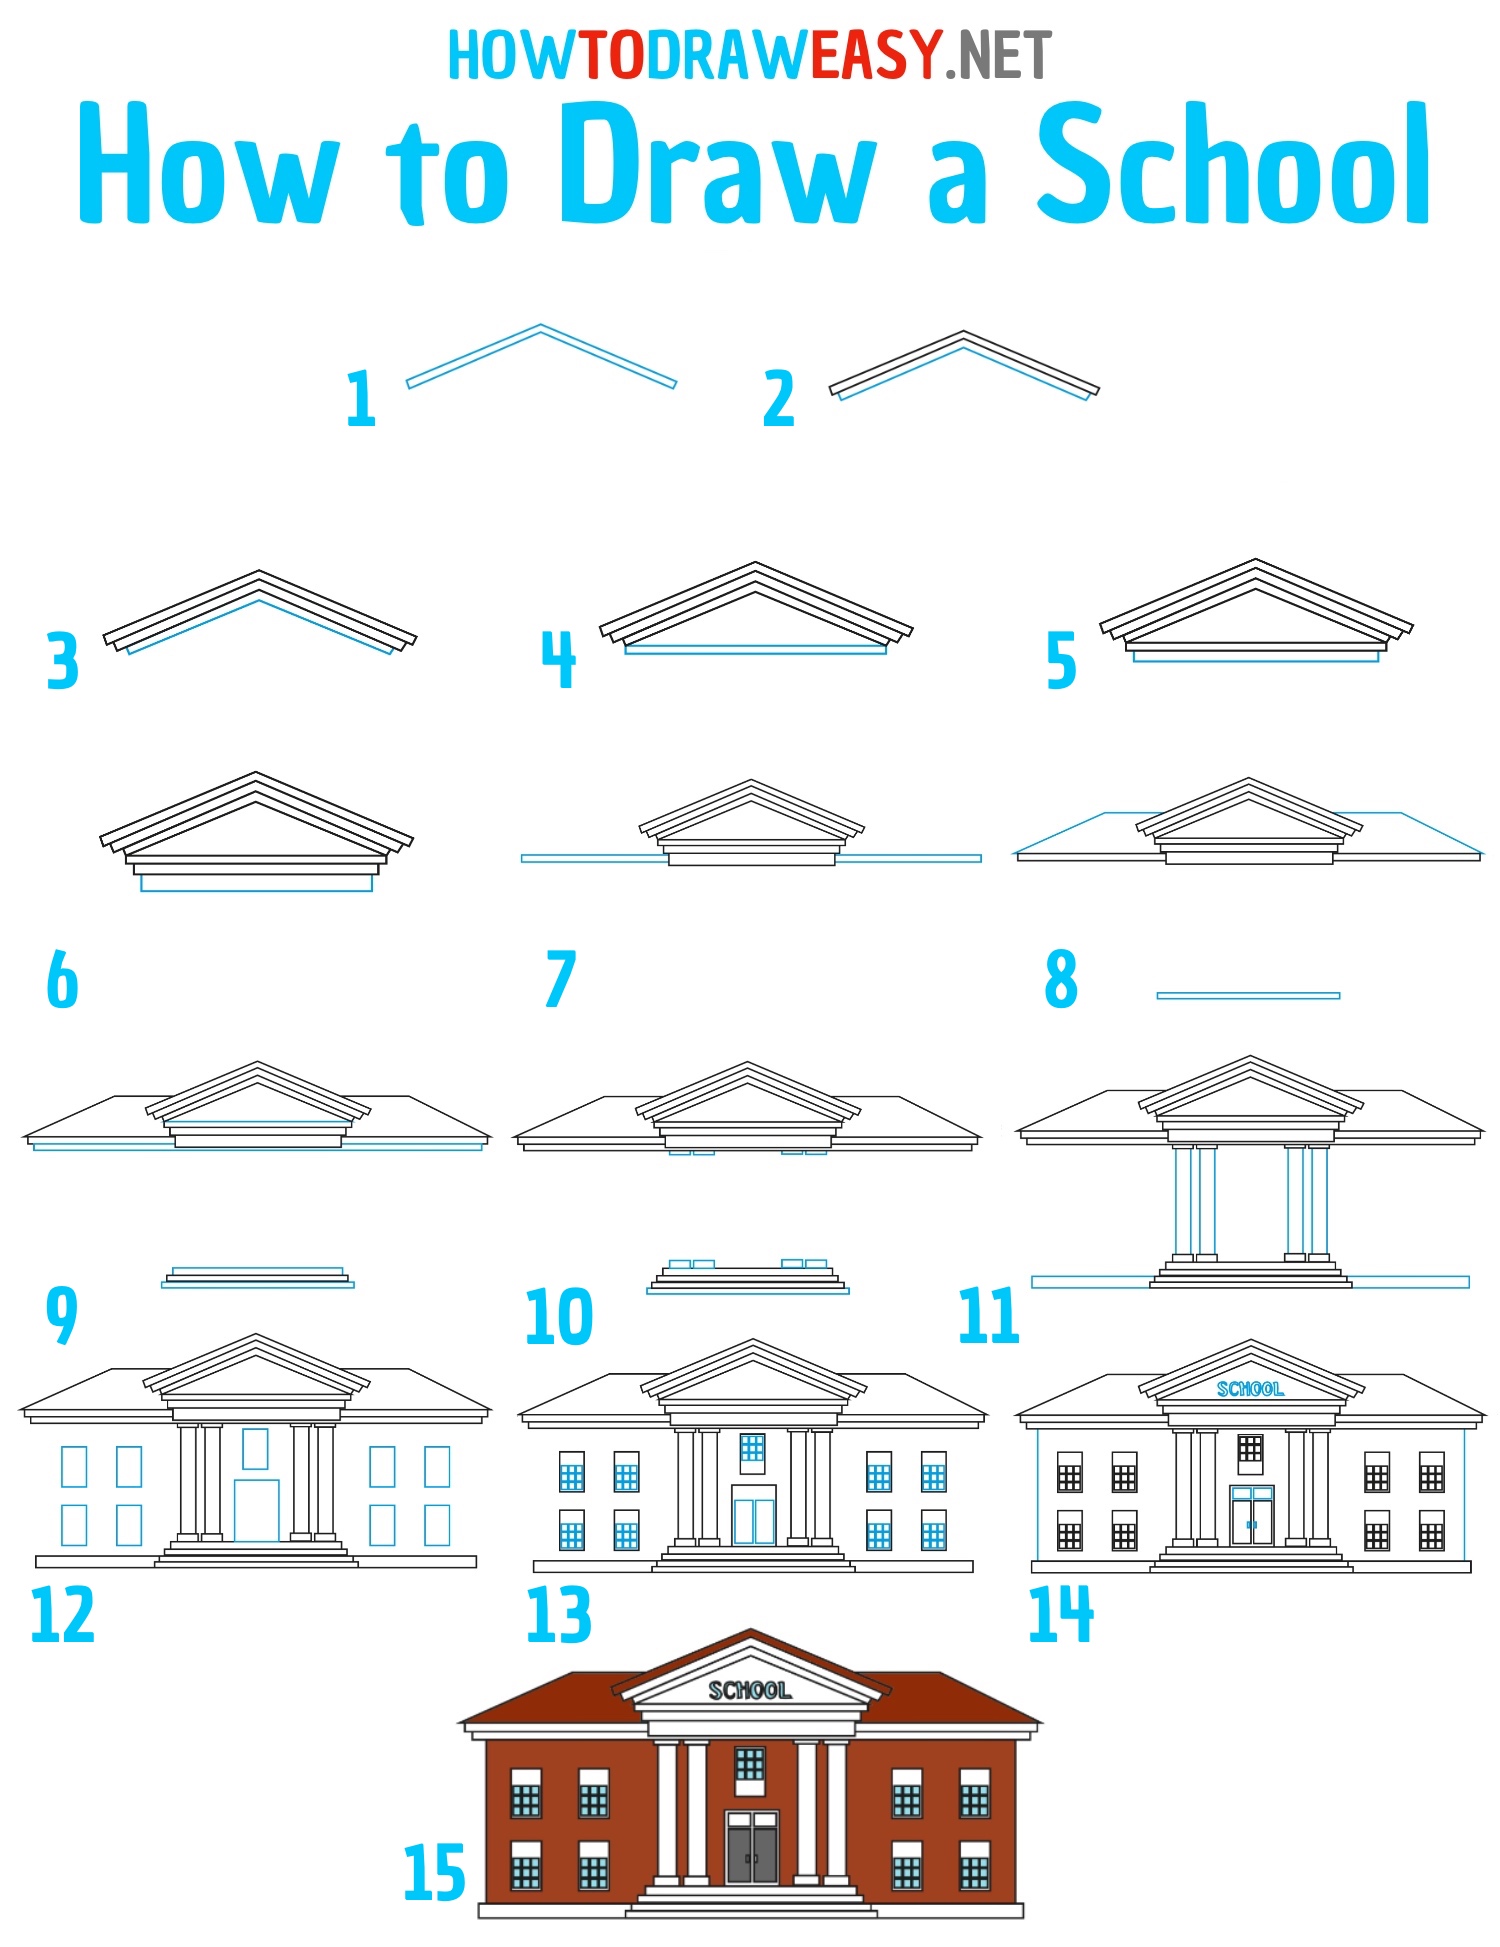 How to Draw a School Step by Step